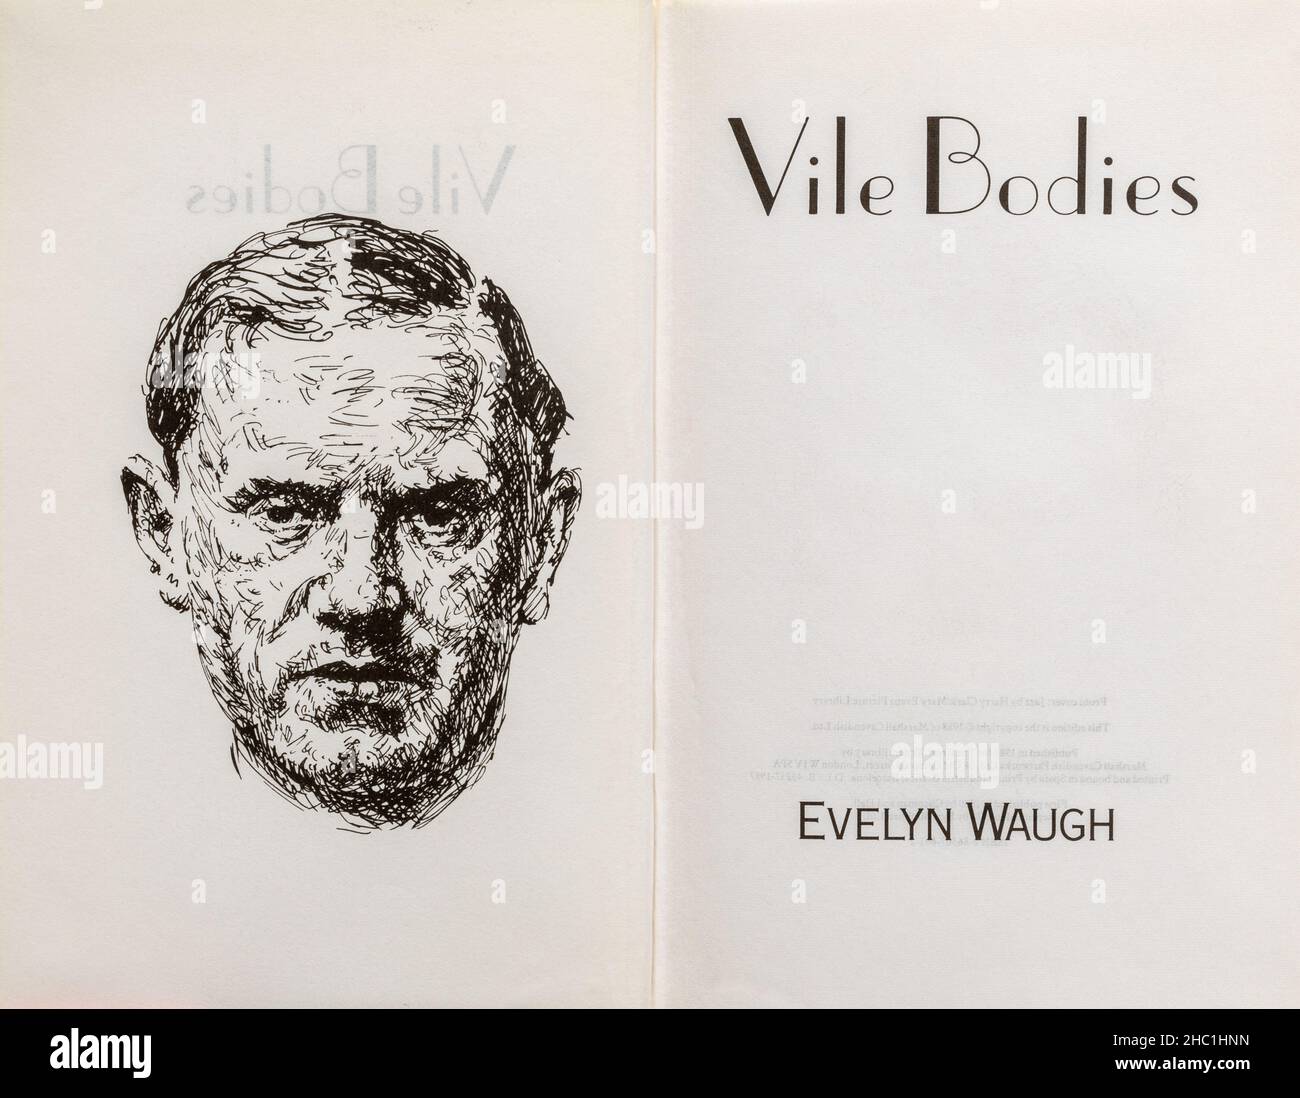 Vile Bodies book - classic novel by Evelyn Waugh. Title page and drawing of the author. Stock Photo